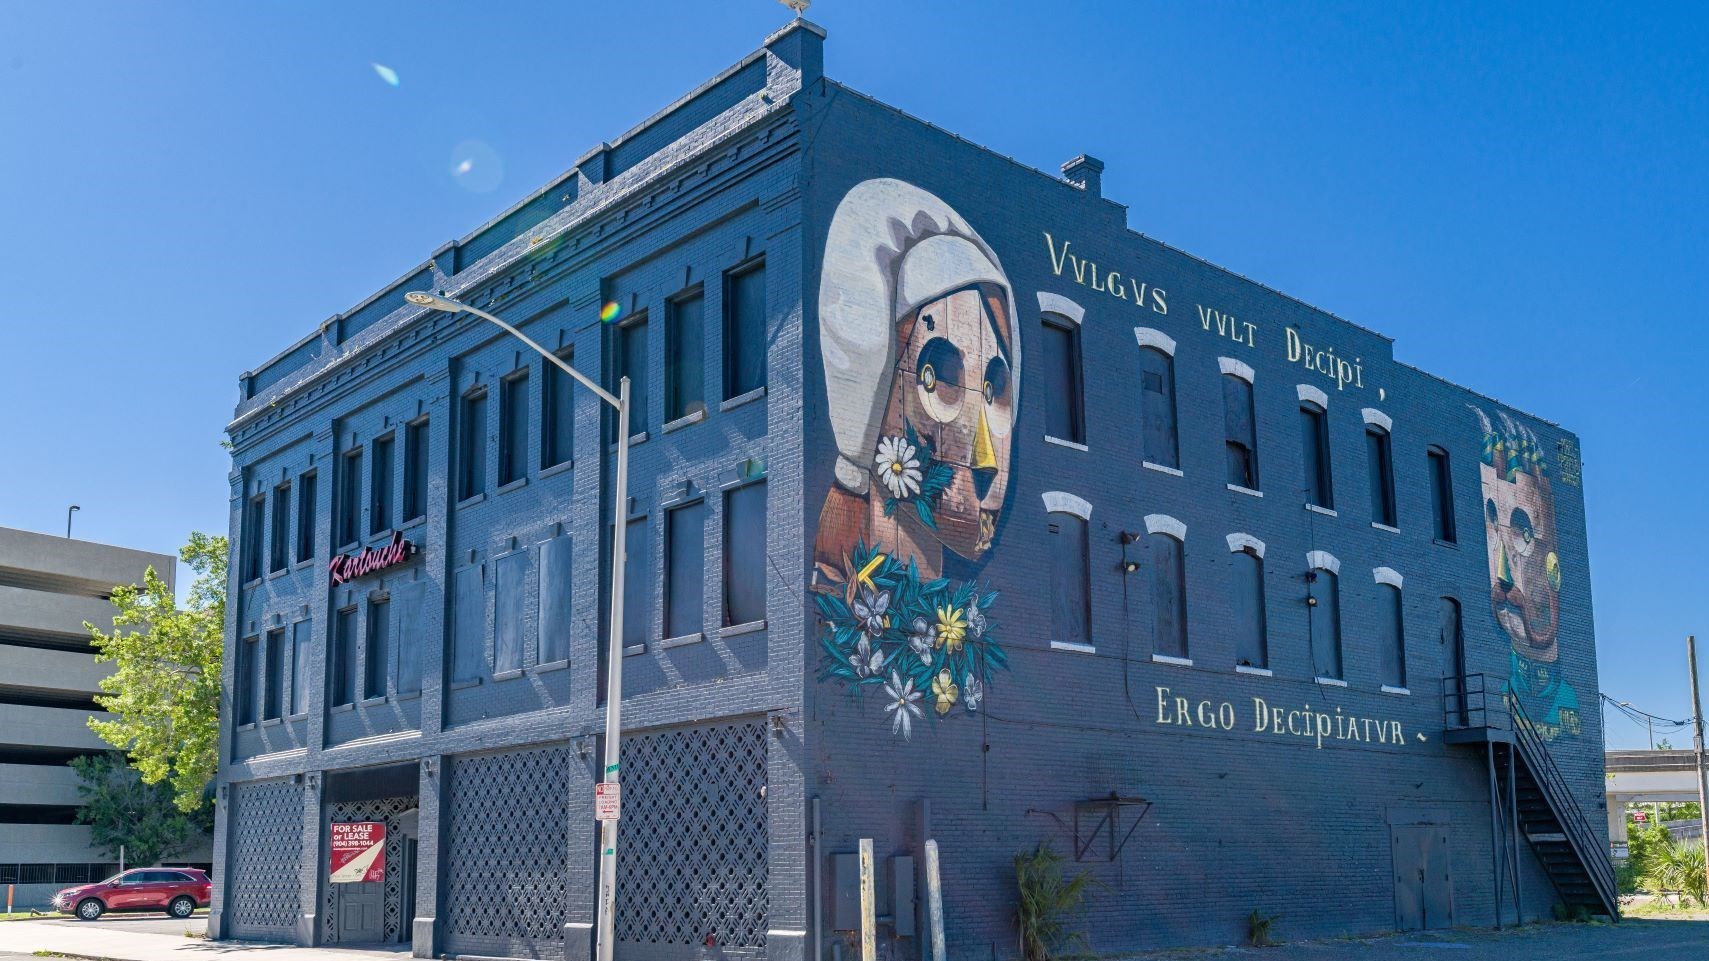 Elev8 Land Clearing & Demolition razed the 106-year-old Kartouche nightclub building Aug. 1.